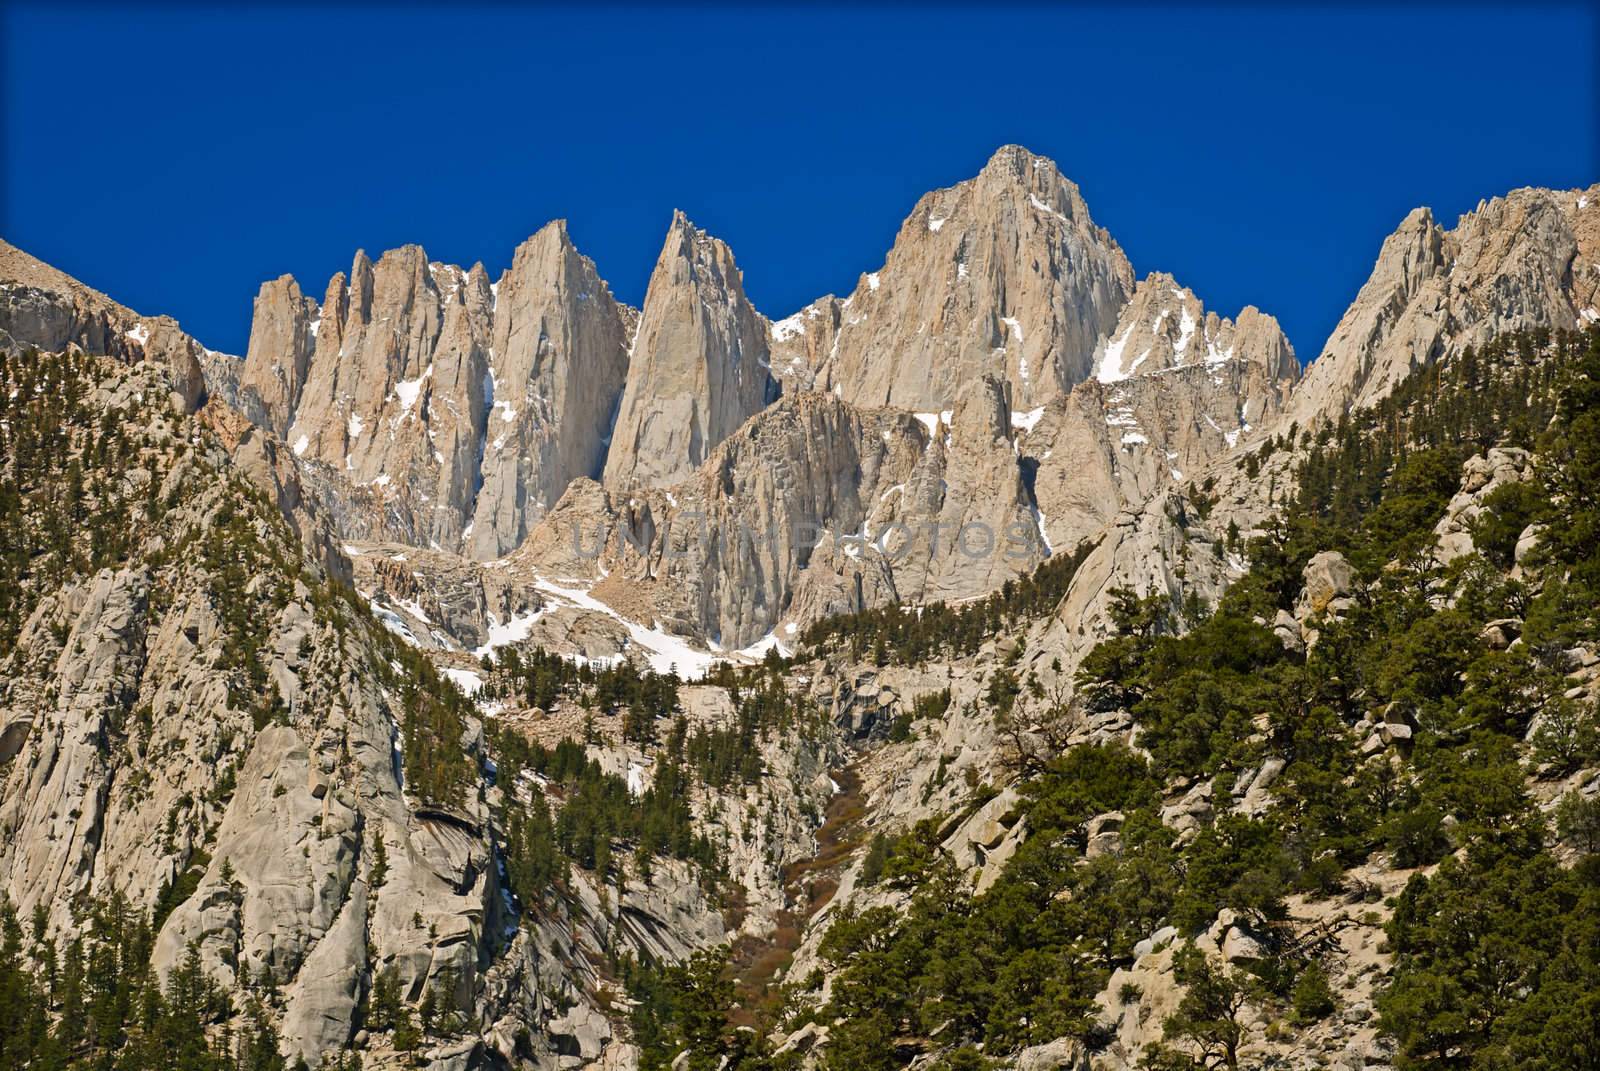 Mt. Whitney (right) (elevation: 14,497 ft. above sea level, highest peak in Lower 48), seen from Whitney Portal Road, Inyo County, CA, USA